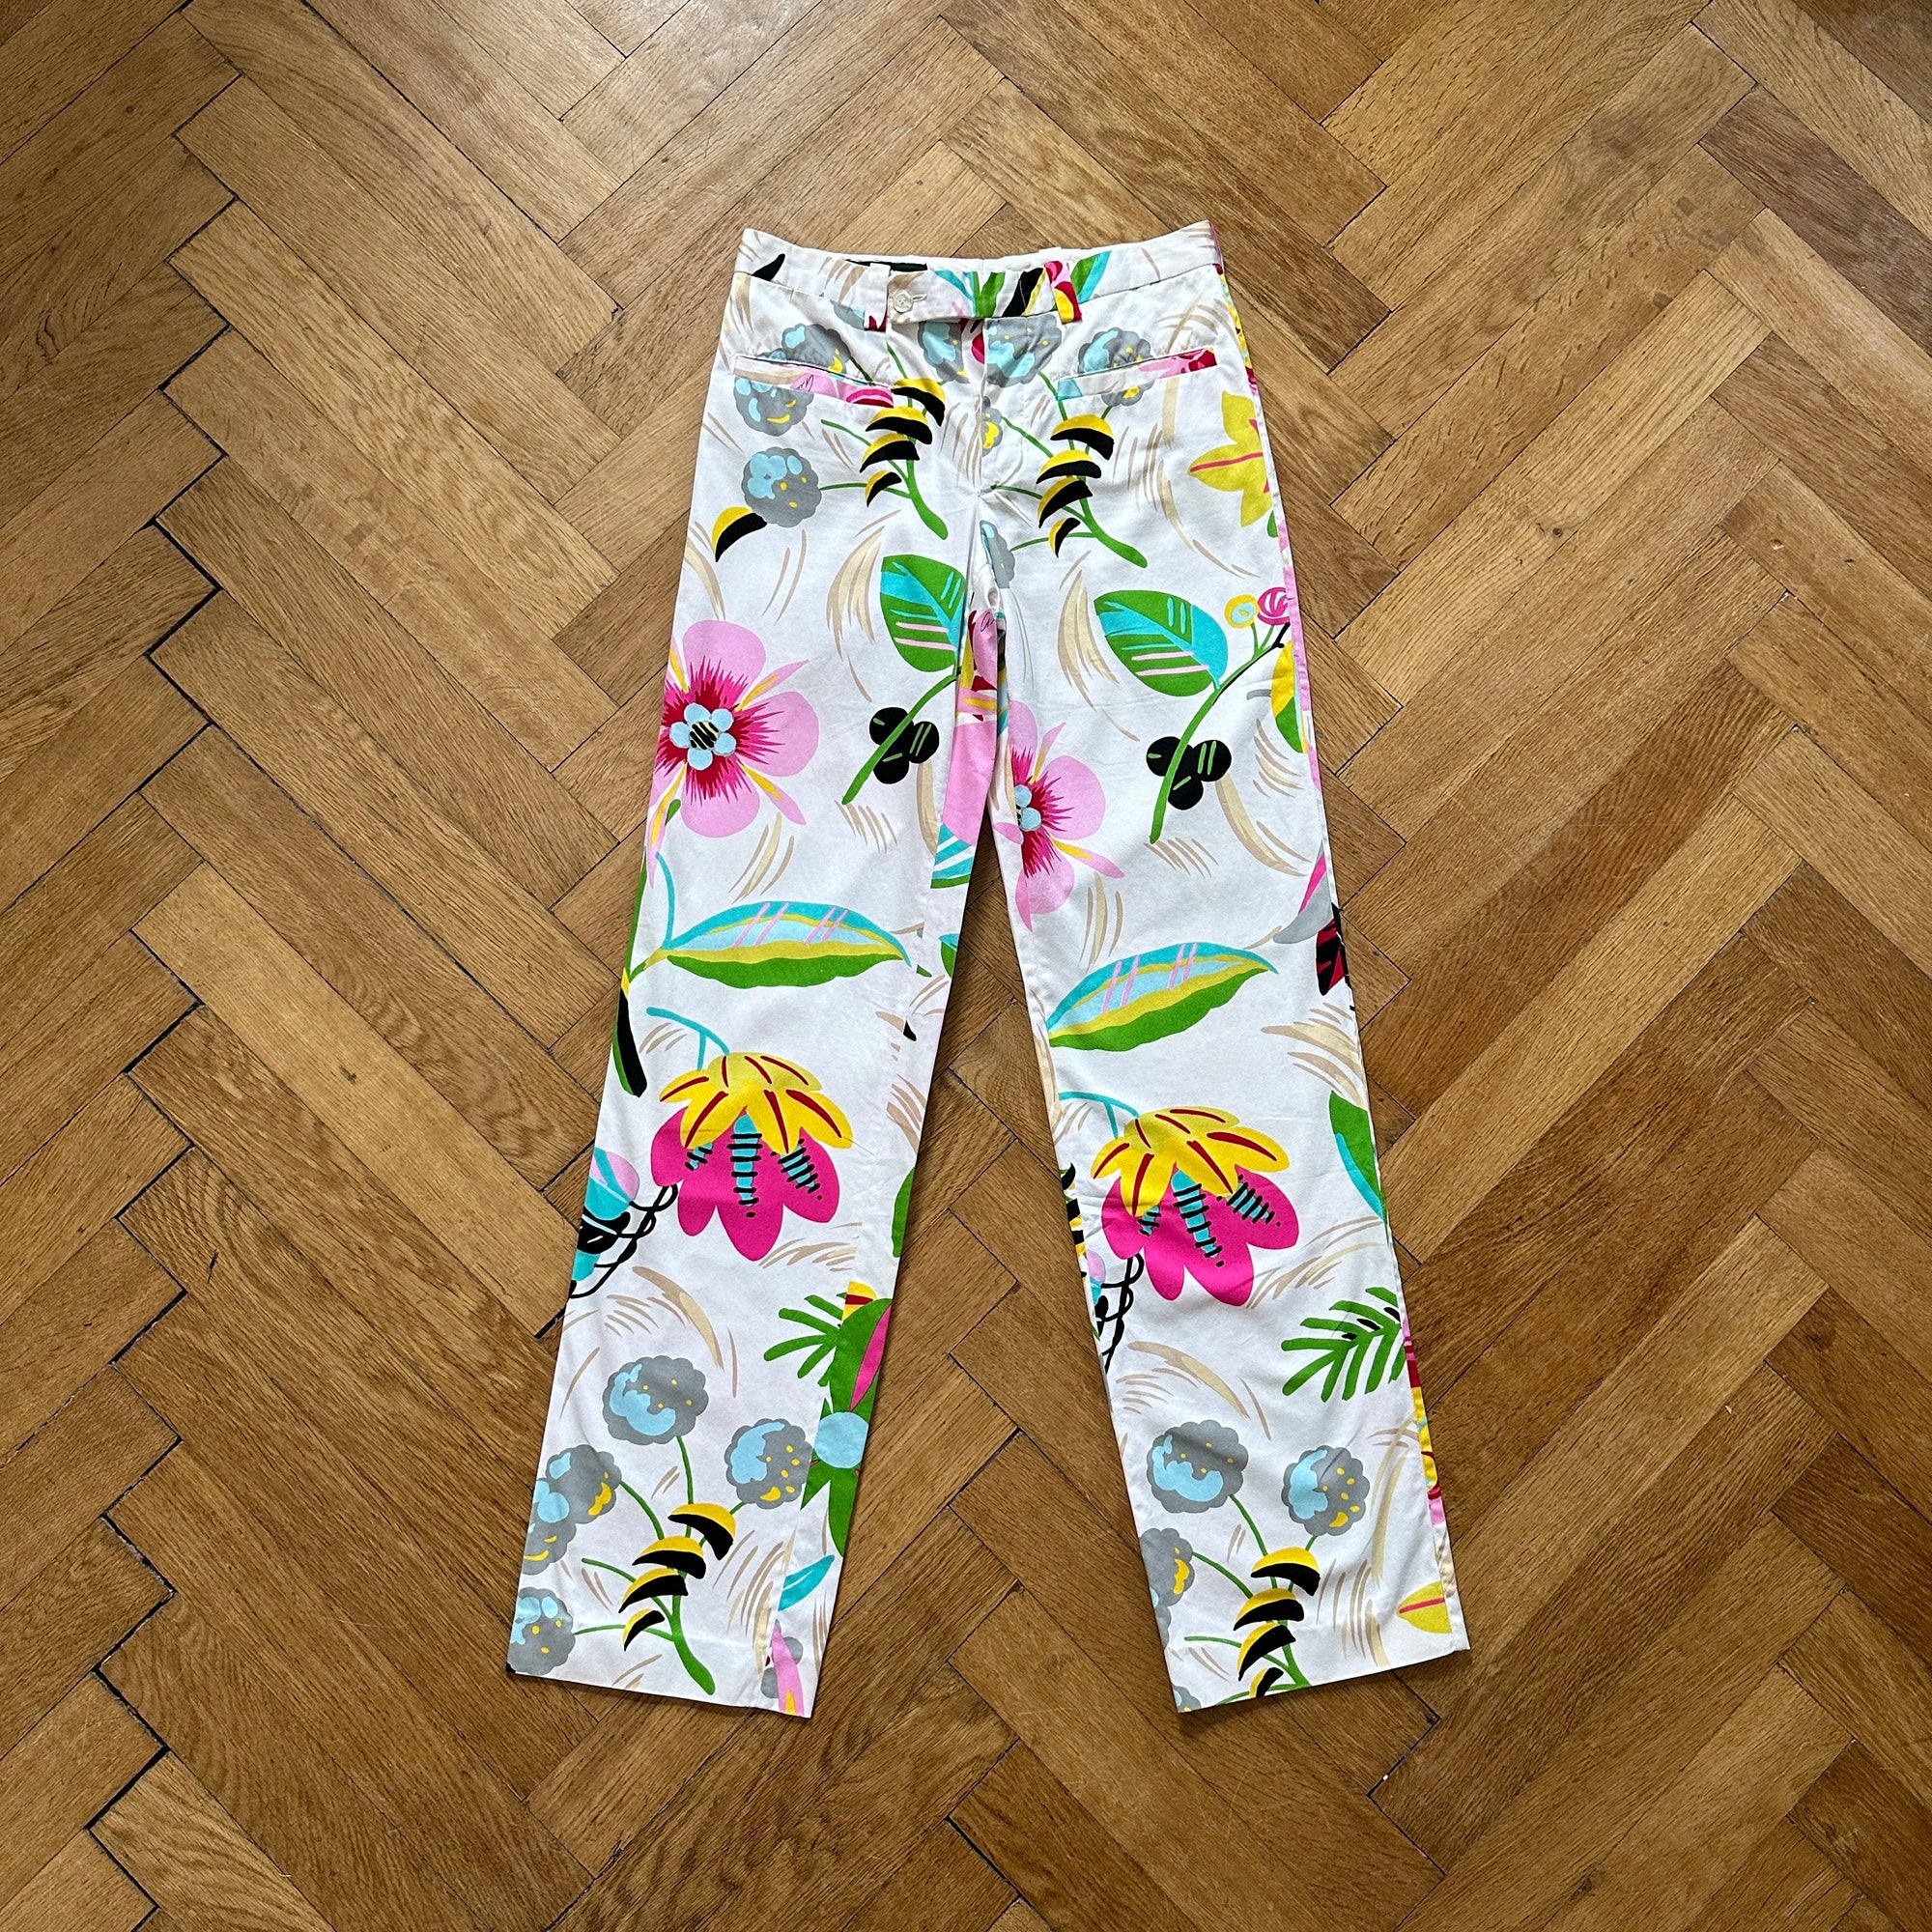 Gucci by Tom Ford SS99 Floral Pants